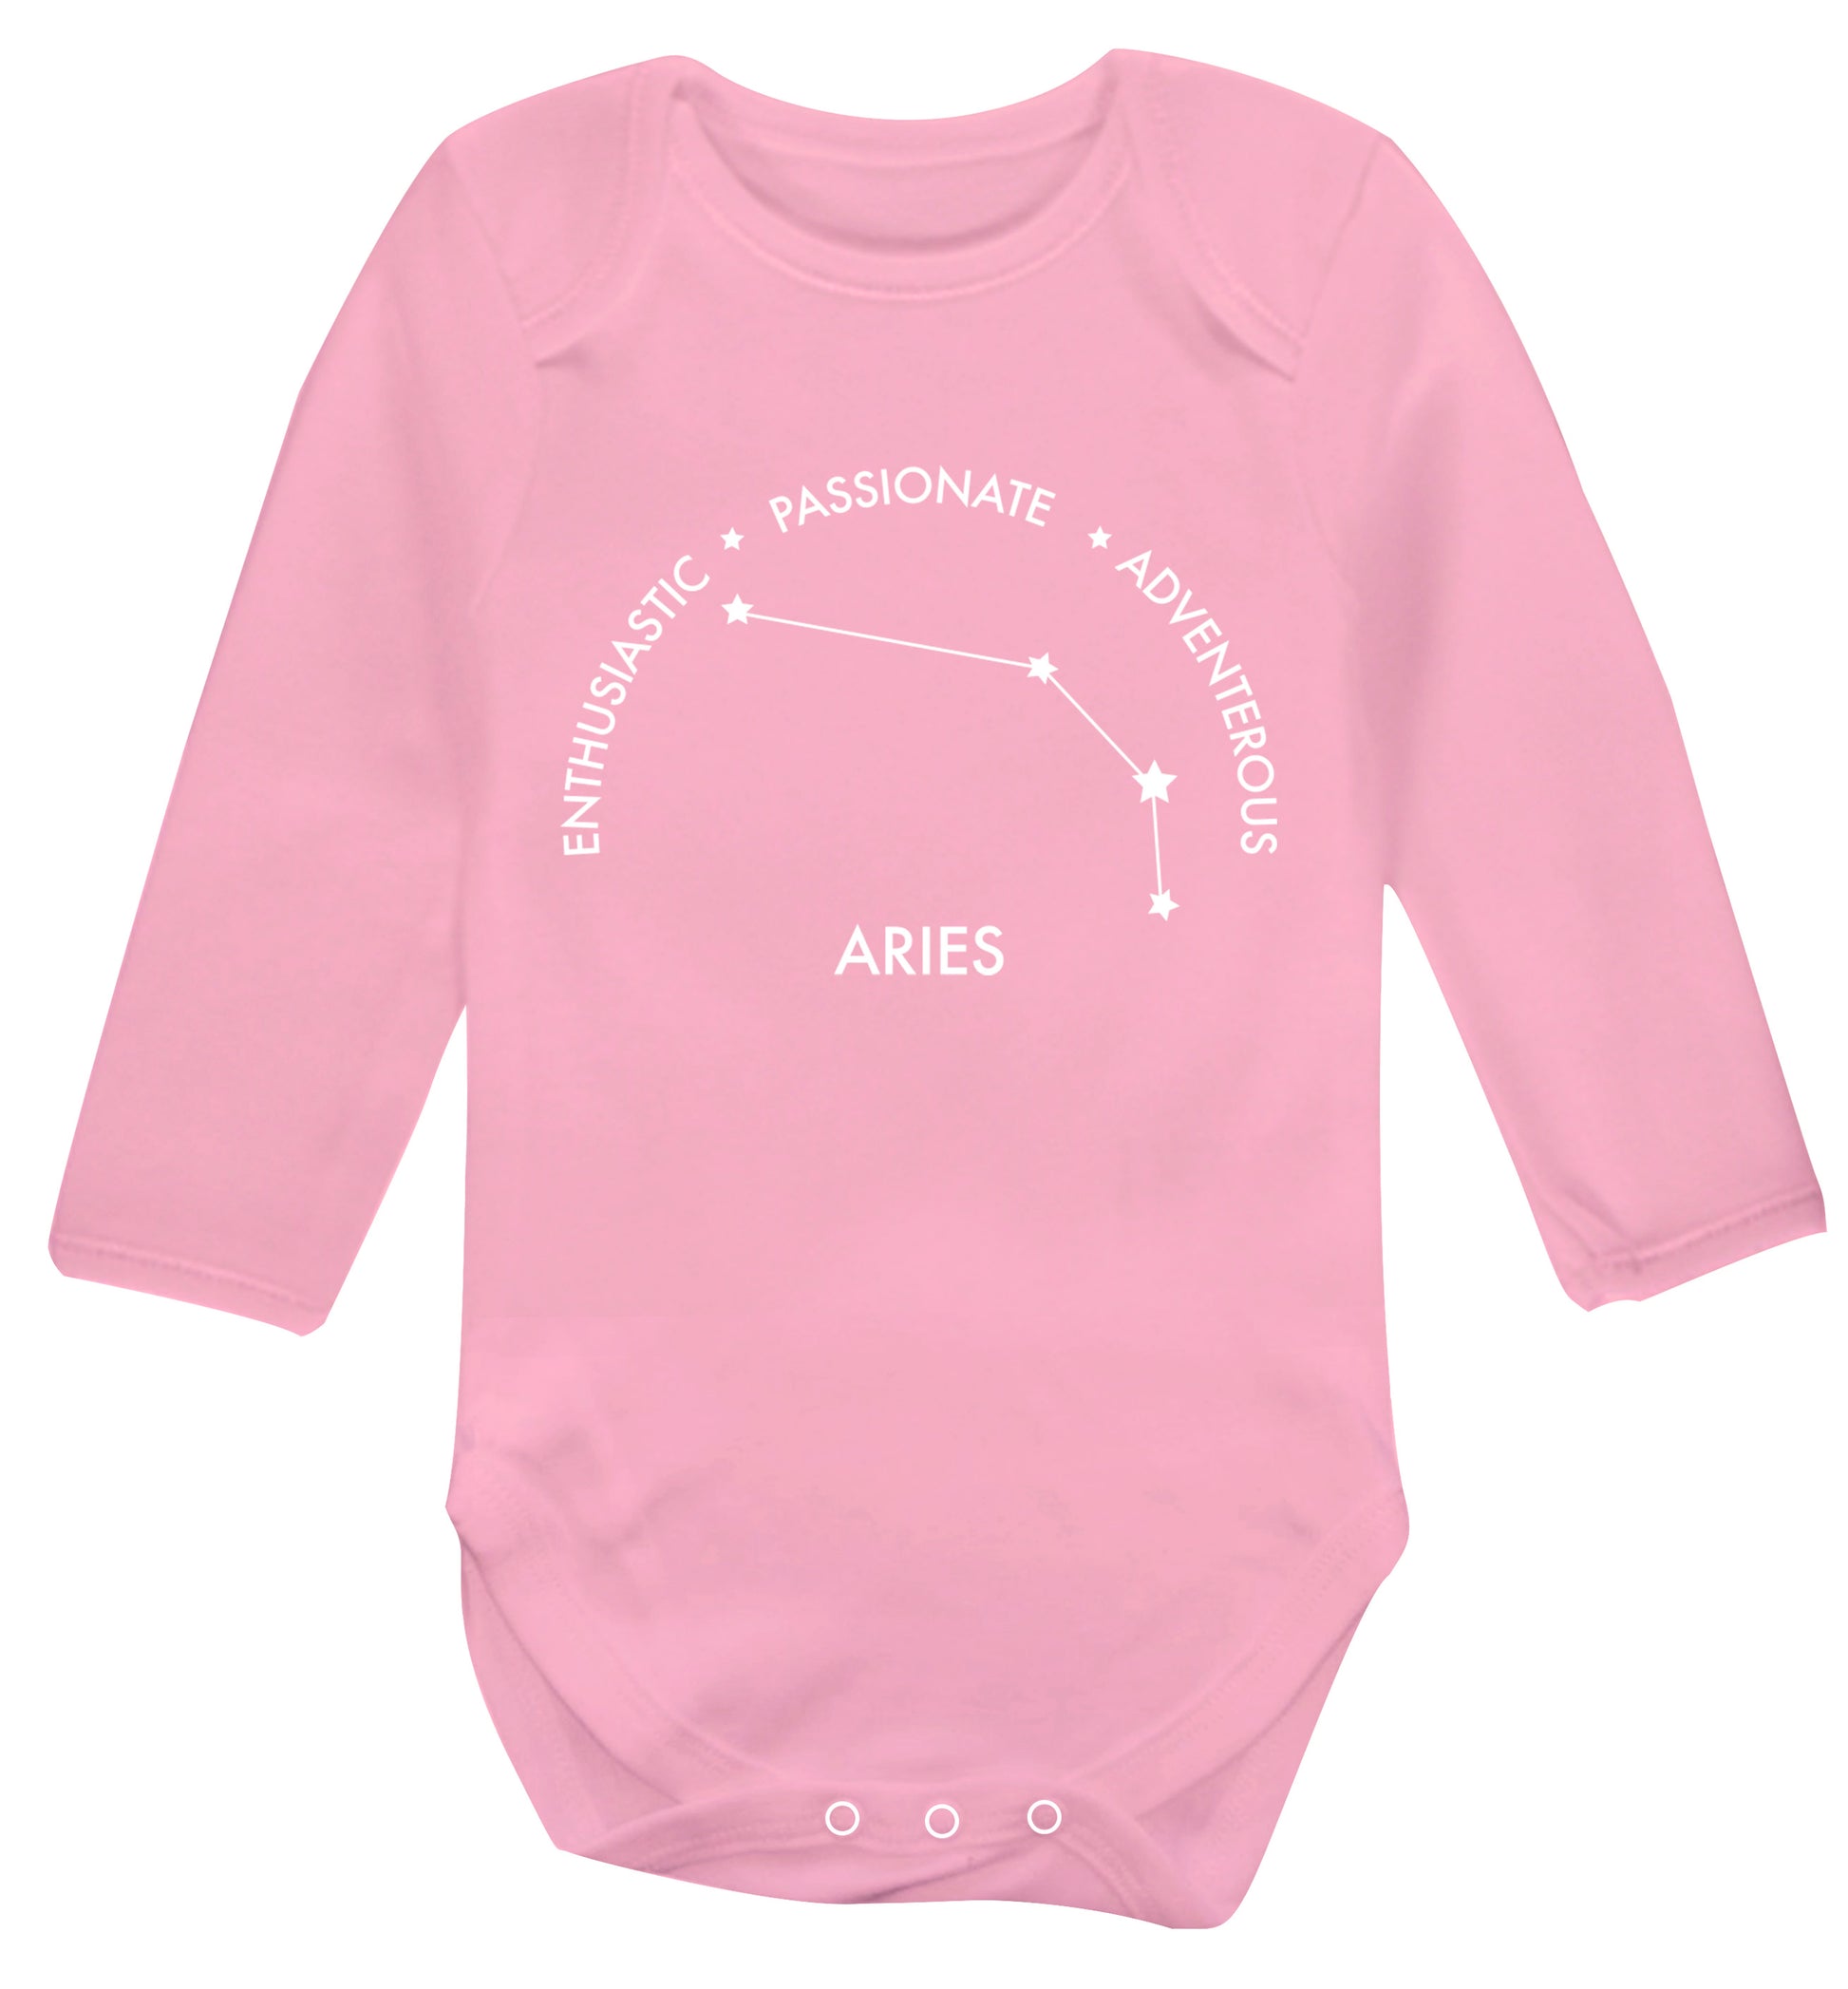 Aries enthusiastic | passionate | adventerous Baby Vest long sleeved pale pink 6-12 months